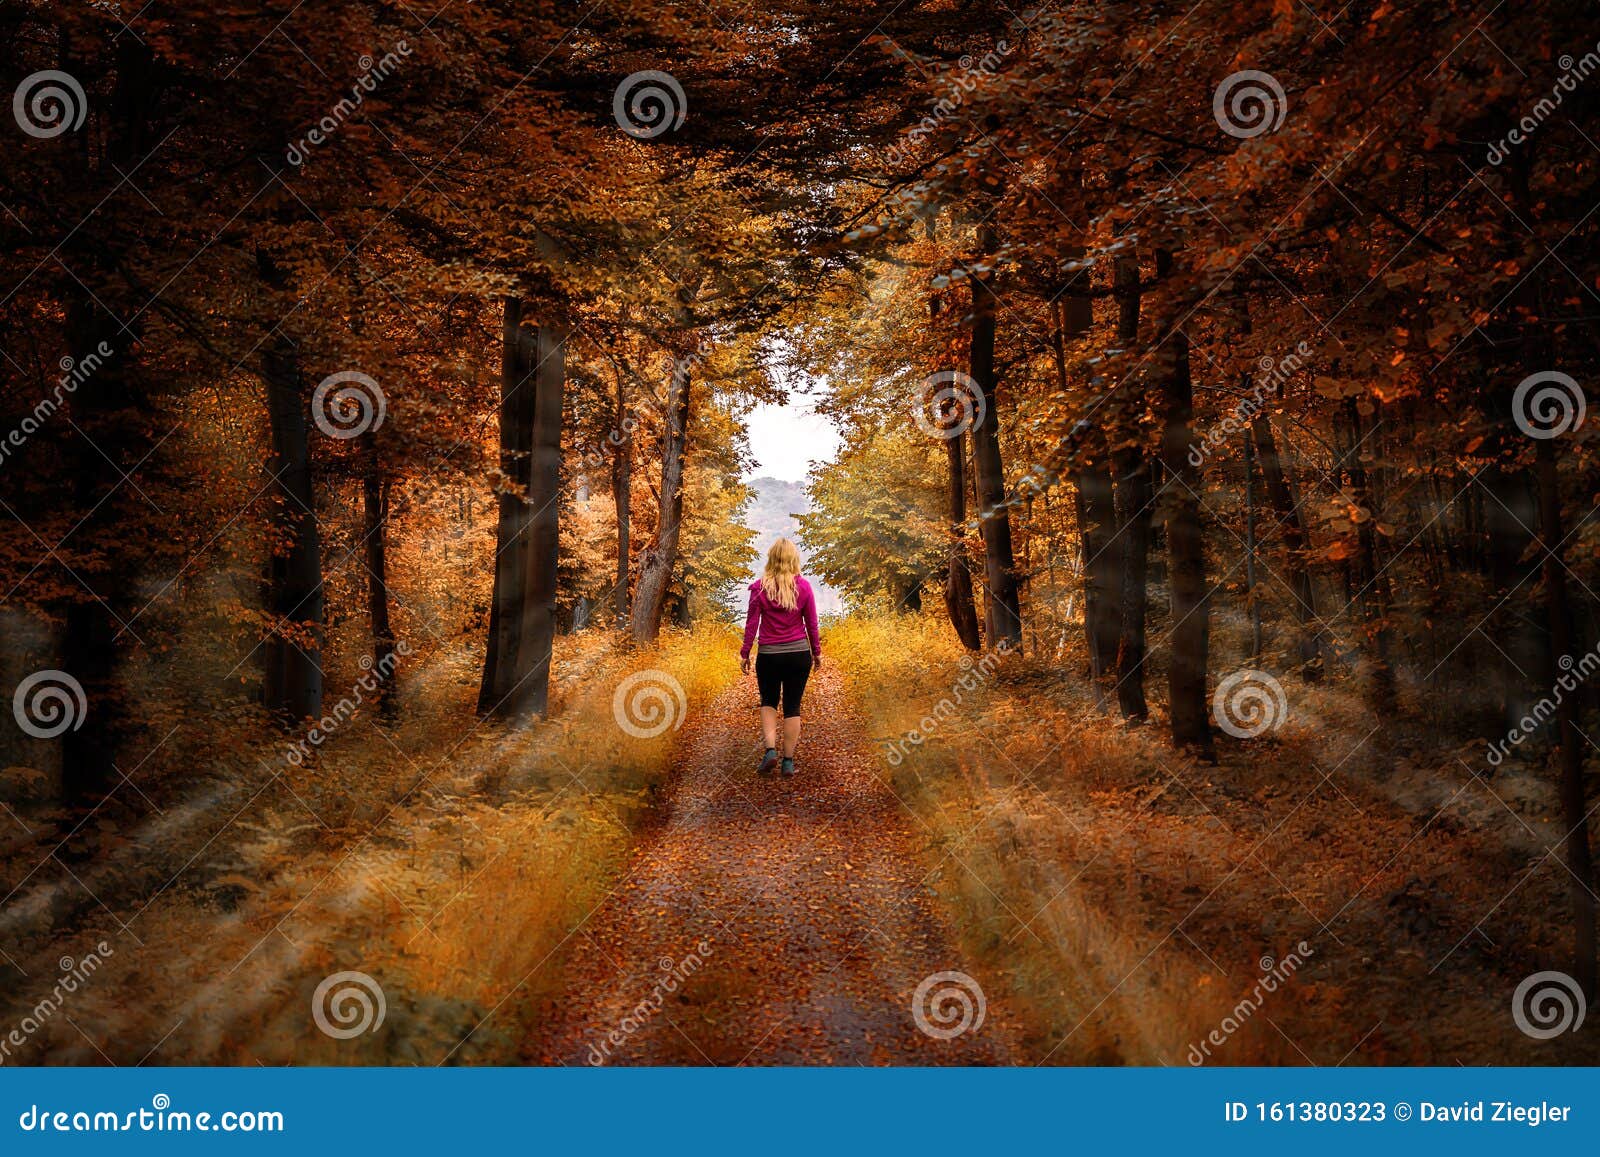 woman walking on a straight path in a colorful autumn forest